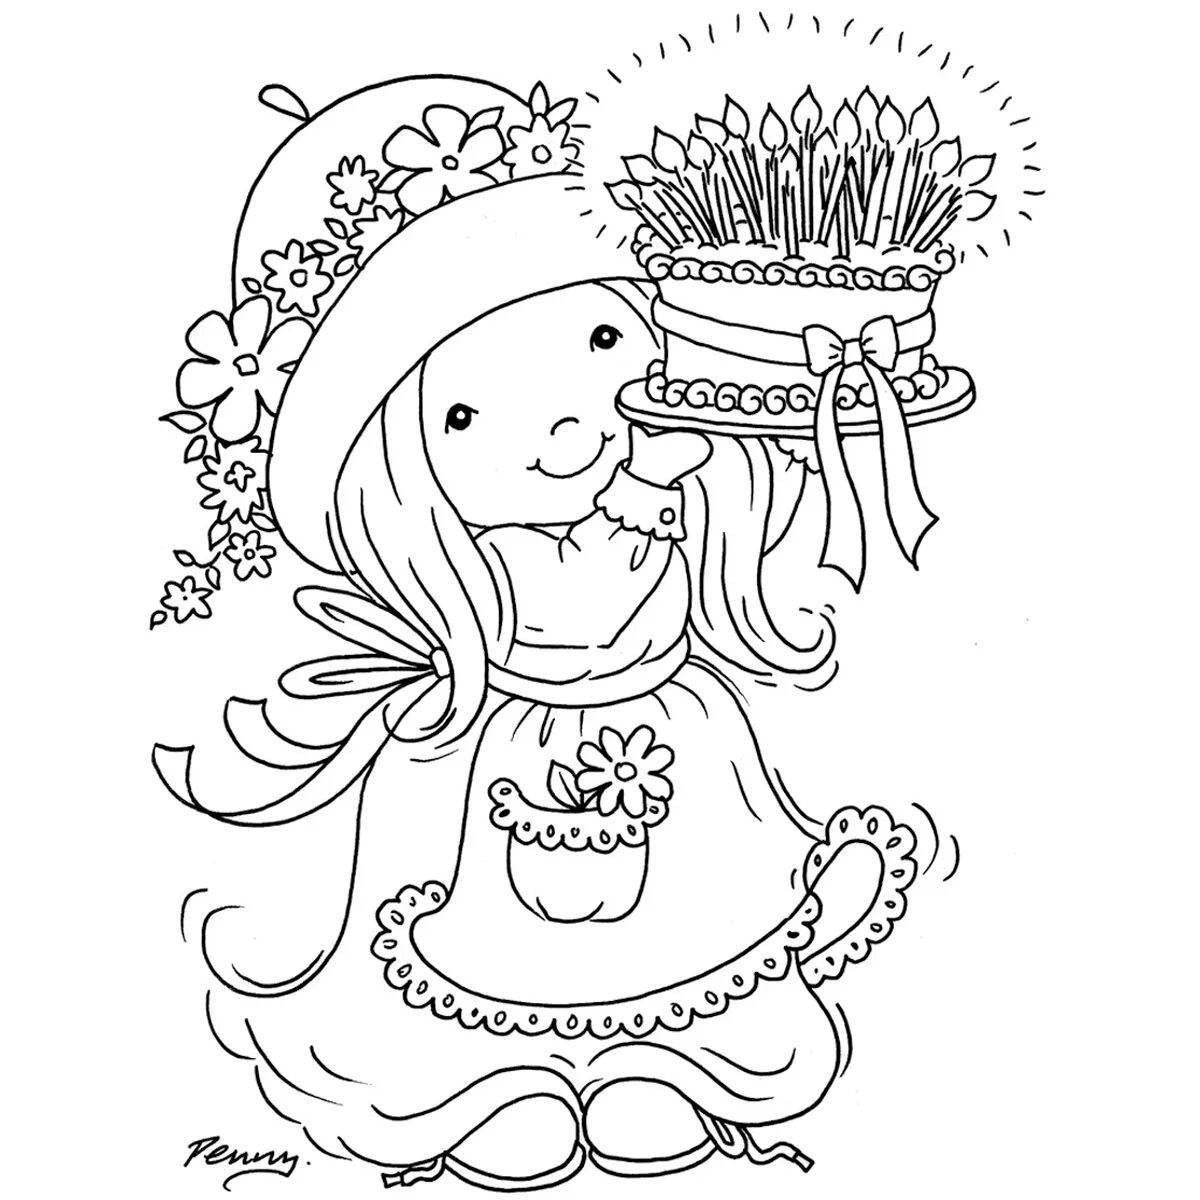 Magic themed coloring book